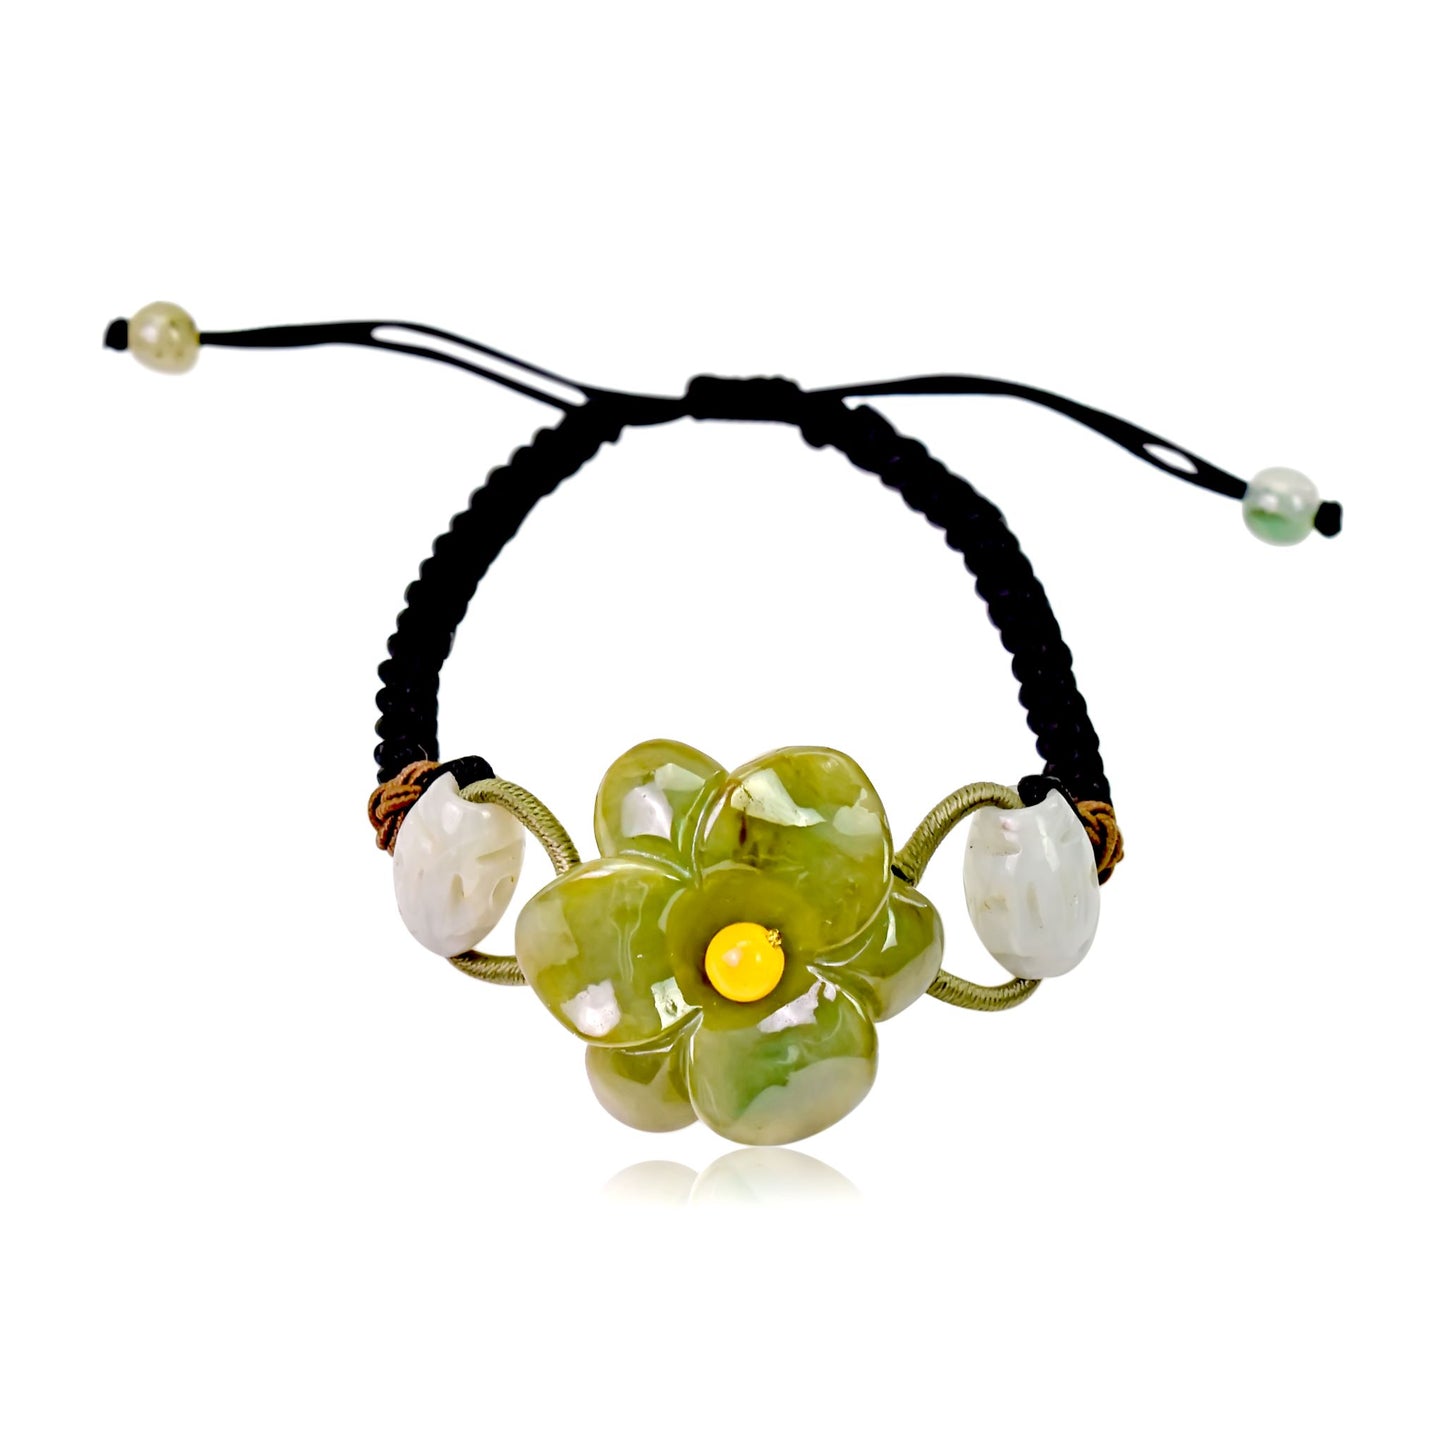 Show Off Your Unique Style with the Amaryllis Jade Bracelet made with Black Cord